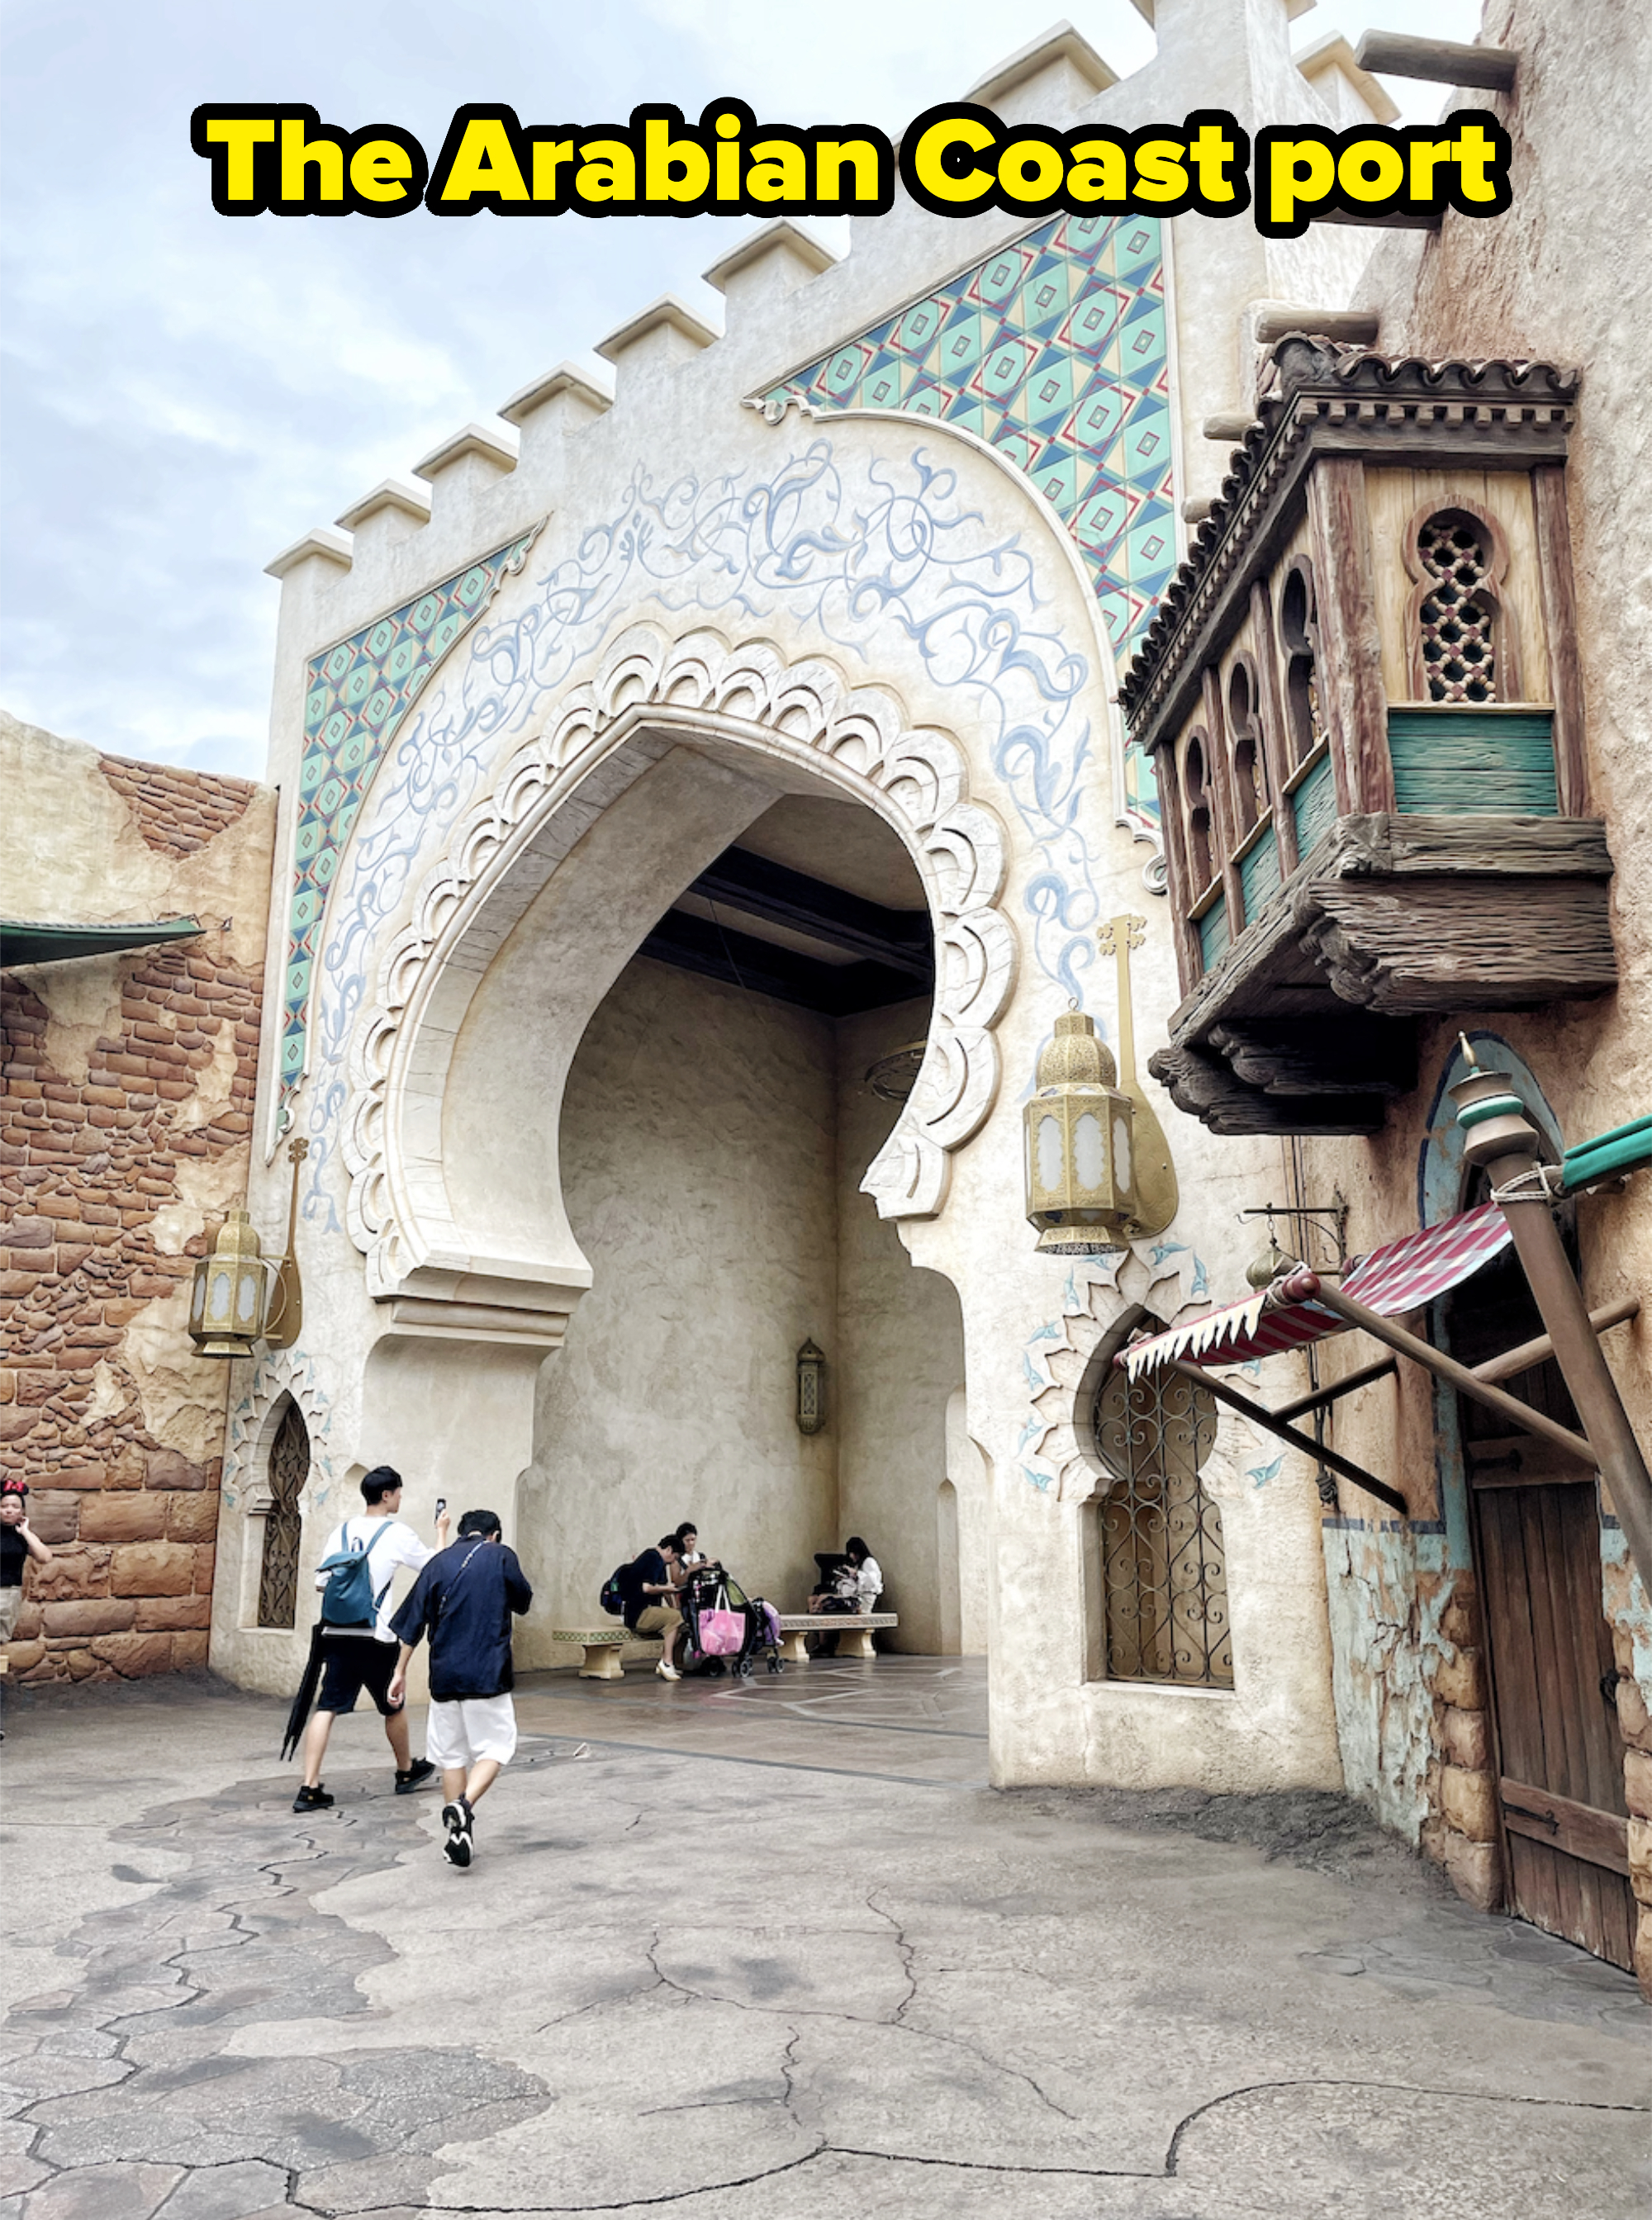 People walking near an ornate arched entrance with intricate designs in a theme park; a group is sitting inside the arch